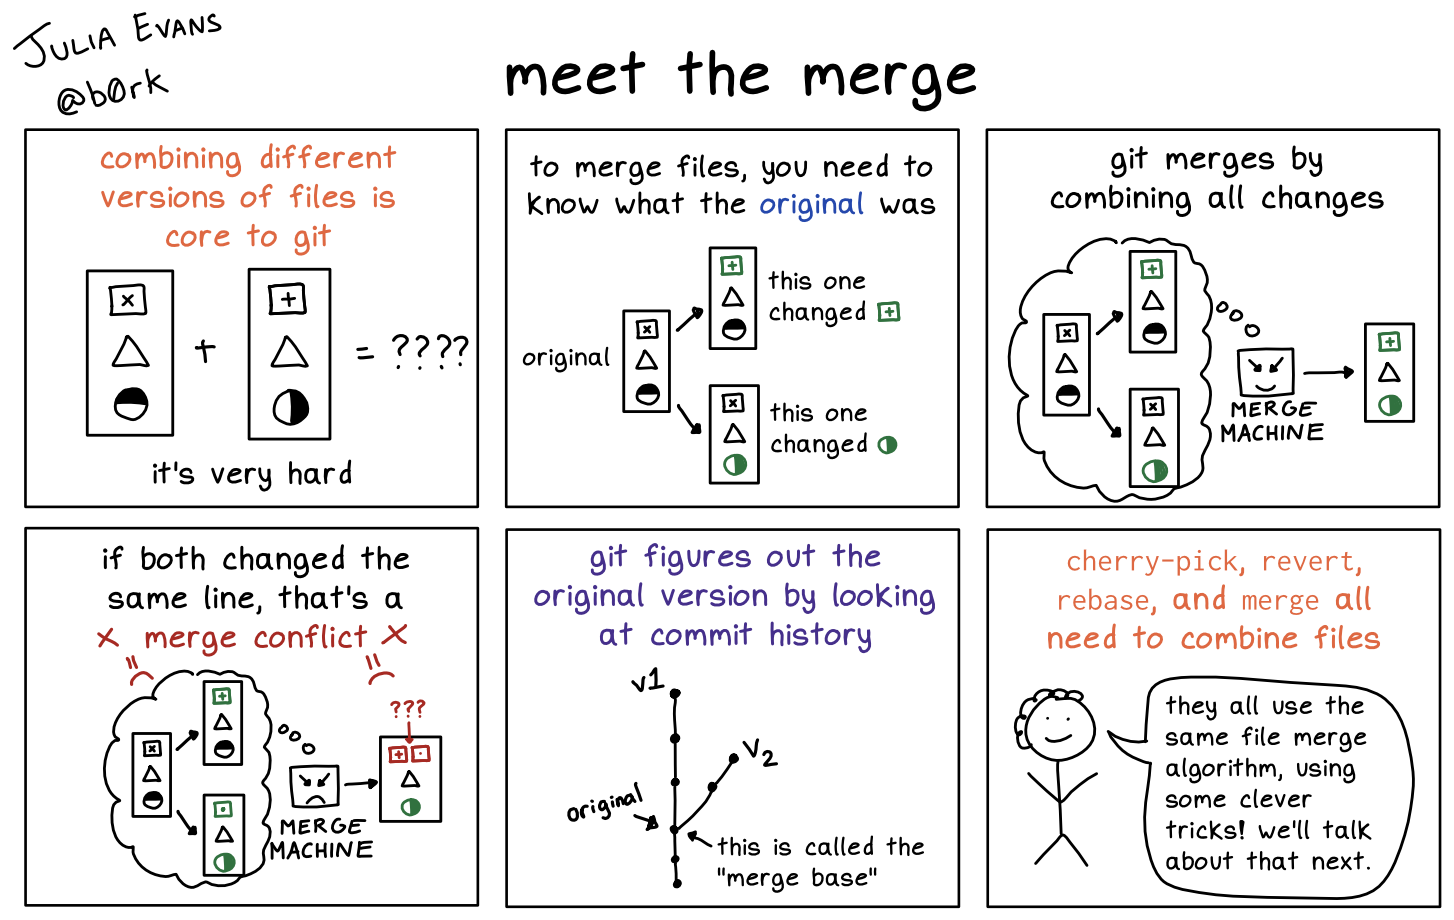 this one has a lot of diagrams so the alt text is kind of rough

title: meet the merge

panel 1: combining different versions of files is core to git

there are a bunch of diagrams with pictures in them, I'm going to use letters to 
picture: (a, b, y) + (x, b, c) = ???

it's very hard

panel 2: to merge files, you need to know what the original was

picture: 

original is (a, b, c)

one side changed a -> x so it's (x, b, c)

the other side changed c -> y so it's (a, b, y)

panel 2: git merges by combining all changes

merge machine with everything from panel 1 in a thought bubble:

(a, b, c)
(x, b, c)
(a, b, y)

result is (x, b, y)

panel 4: if both changed the same line it's a merge conflict

oh no!

panel 5: git figures out the original version by looking at commit history

panel 6: cherry-pick, revert, rebase, and merge all need to combine files

person: "they all use the same merge algorithm, using some clever tricks! we'll talk about that next."